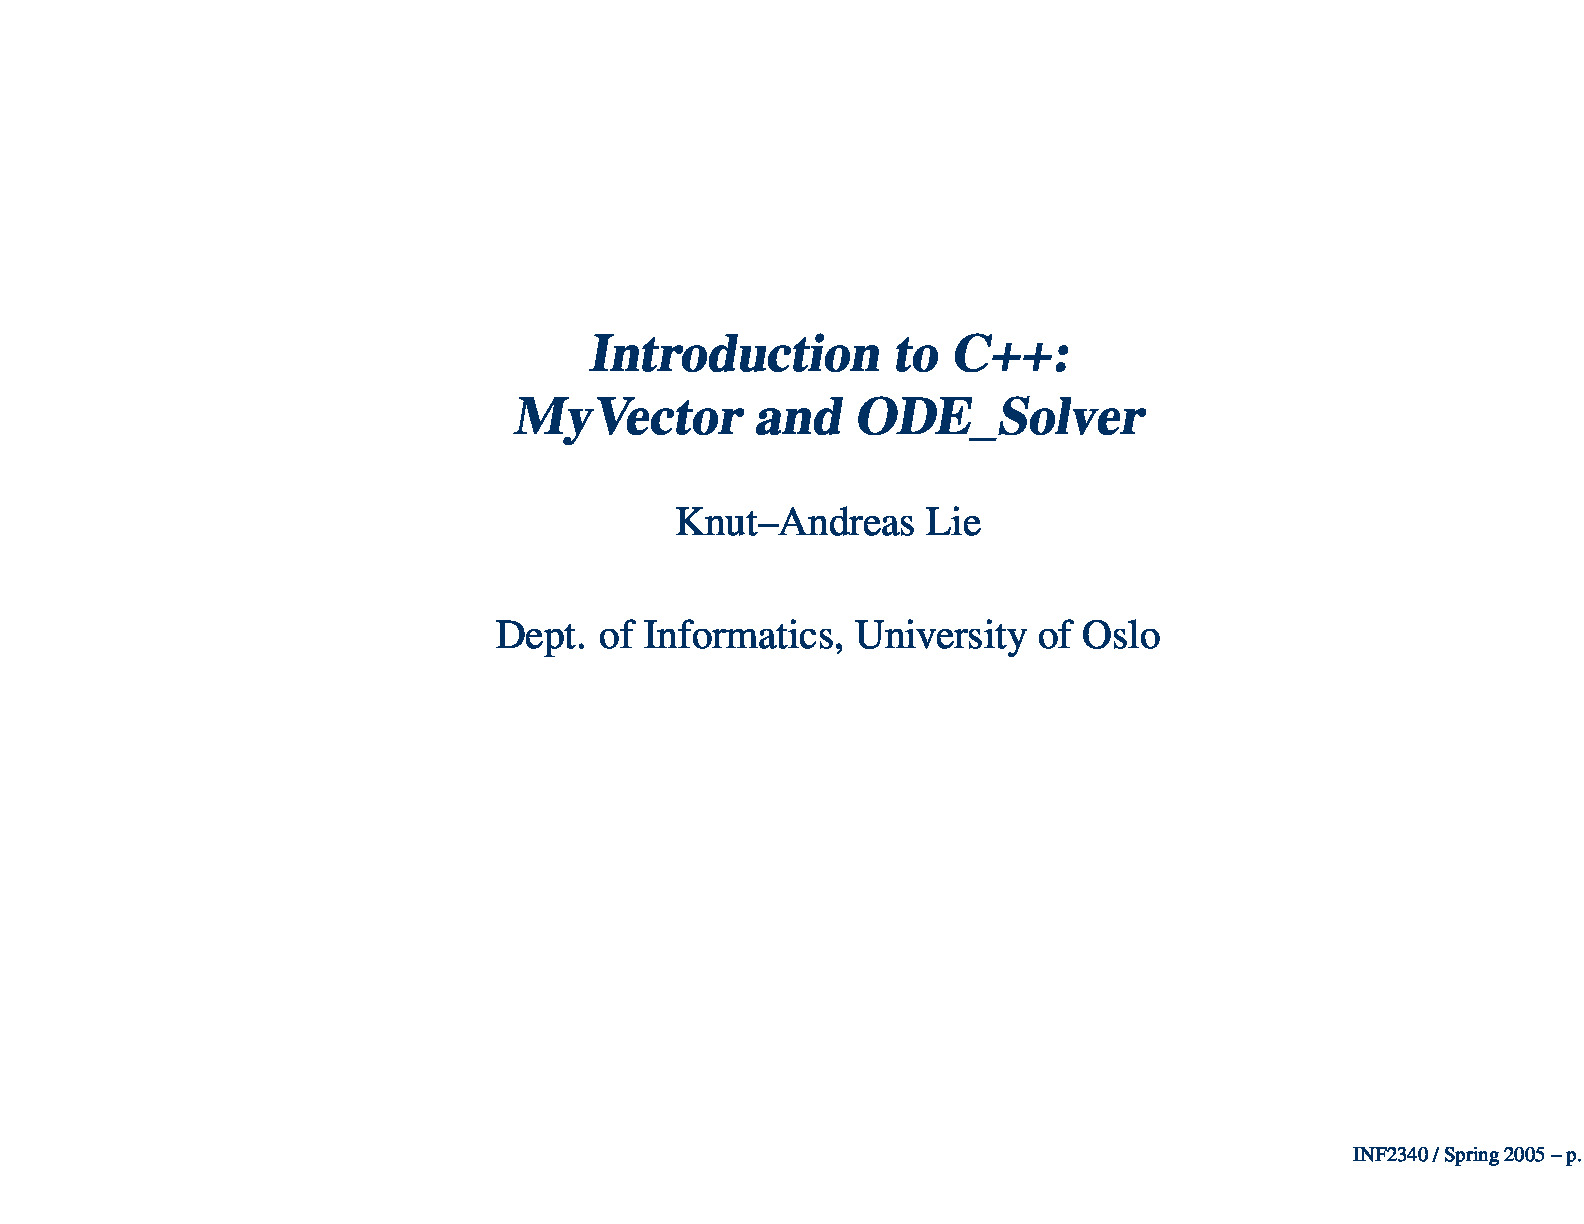 sim03 – Introduction to CPP – MyVector and ODE Solver